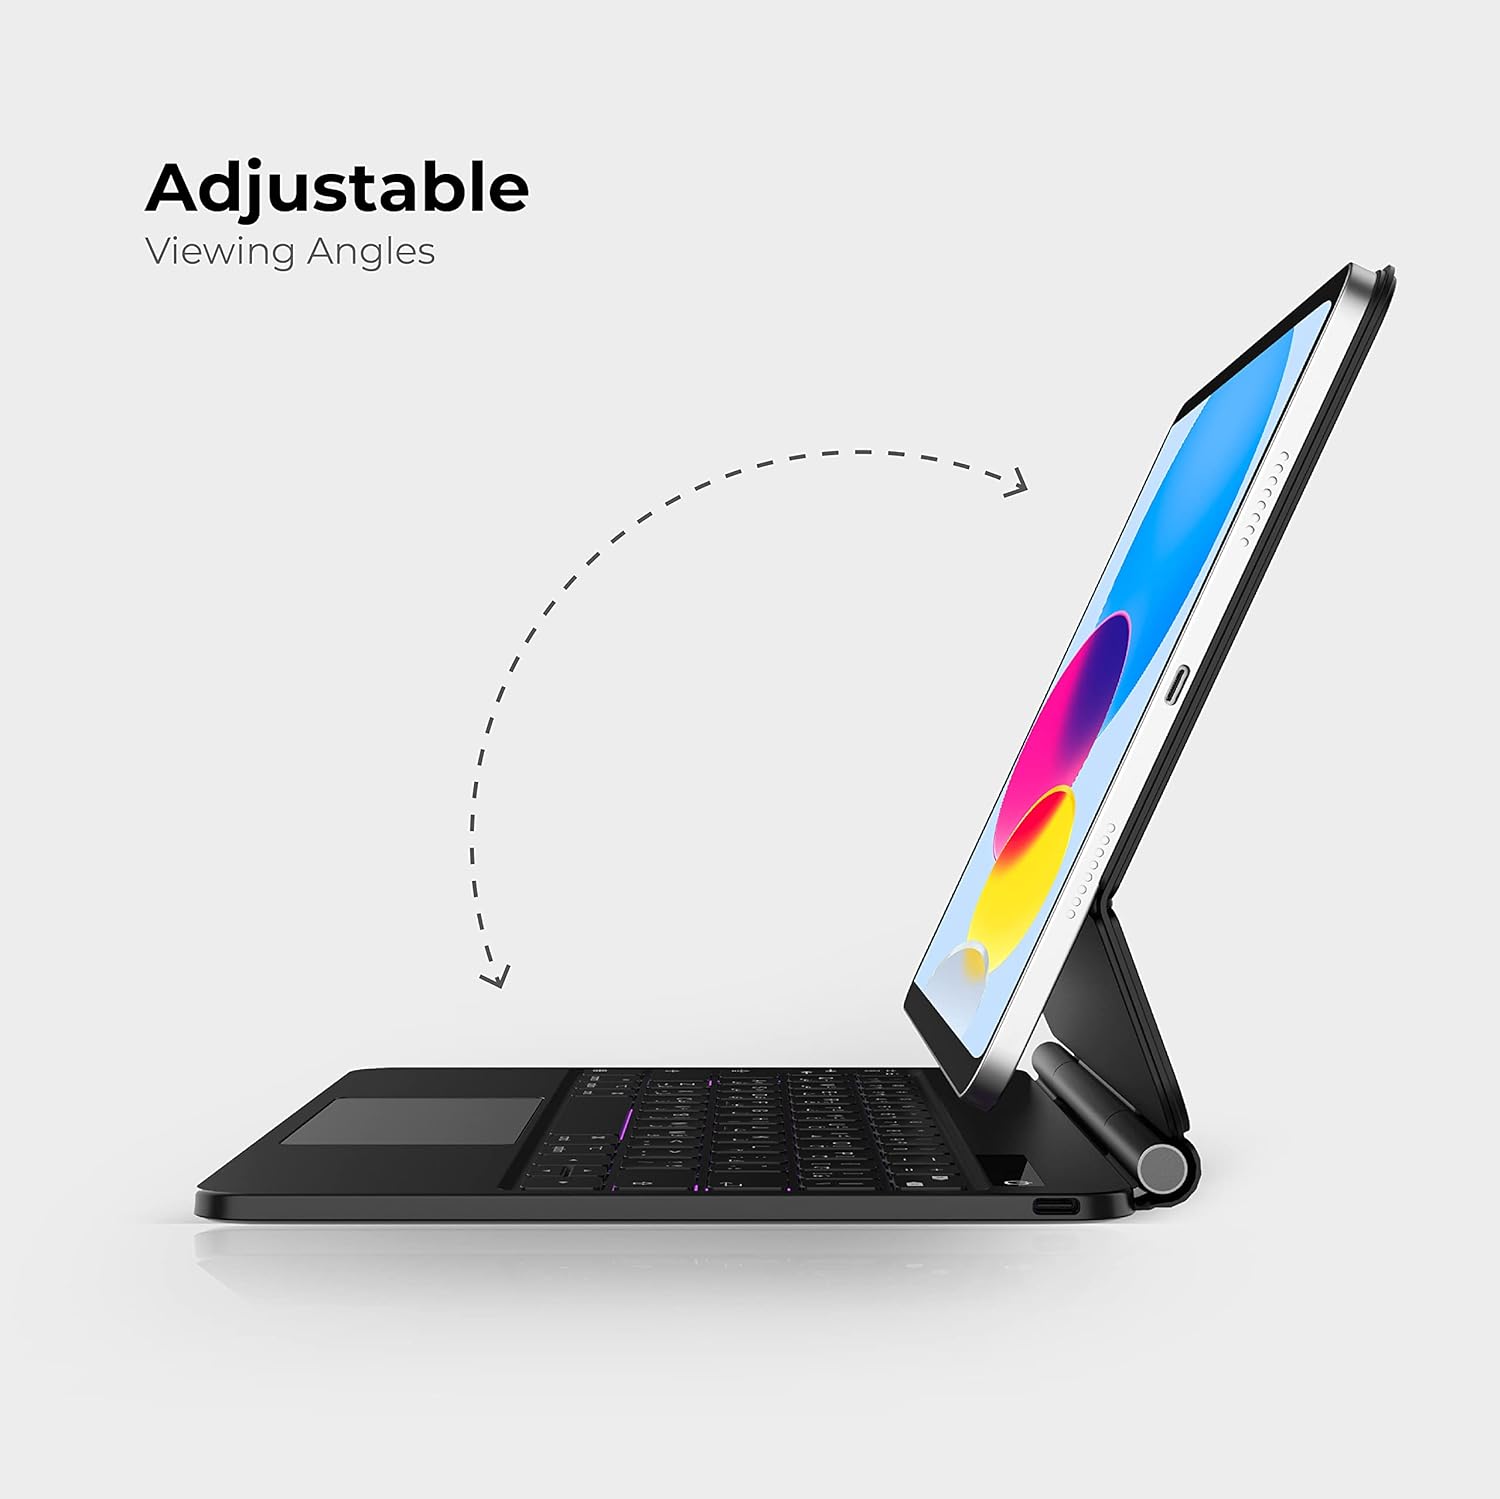 Blupebble Magic Folio Detachable Magnetic Keyboard with Large Precision Trackpad, Full-Size Backlit Keyboard Designed for iPad Pro 4th Gen. (11 inches)/iPad Air 5th Gen (10.9 inches)